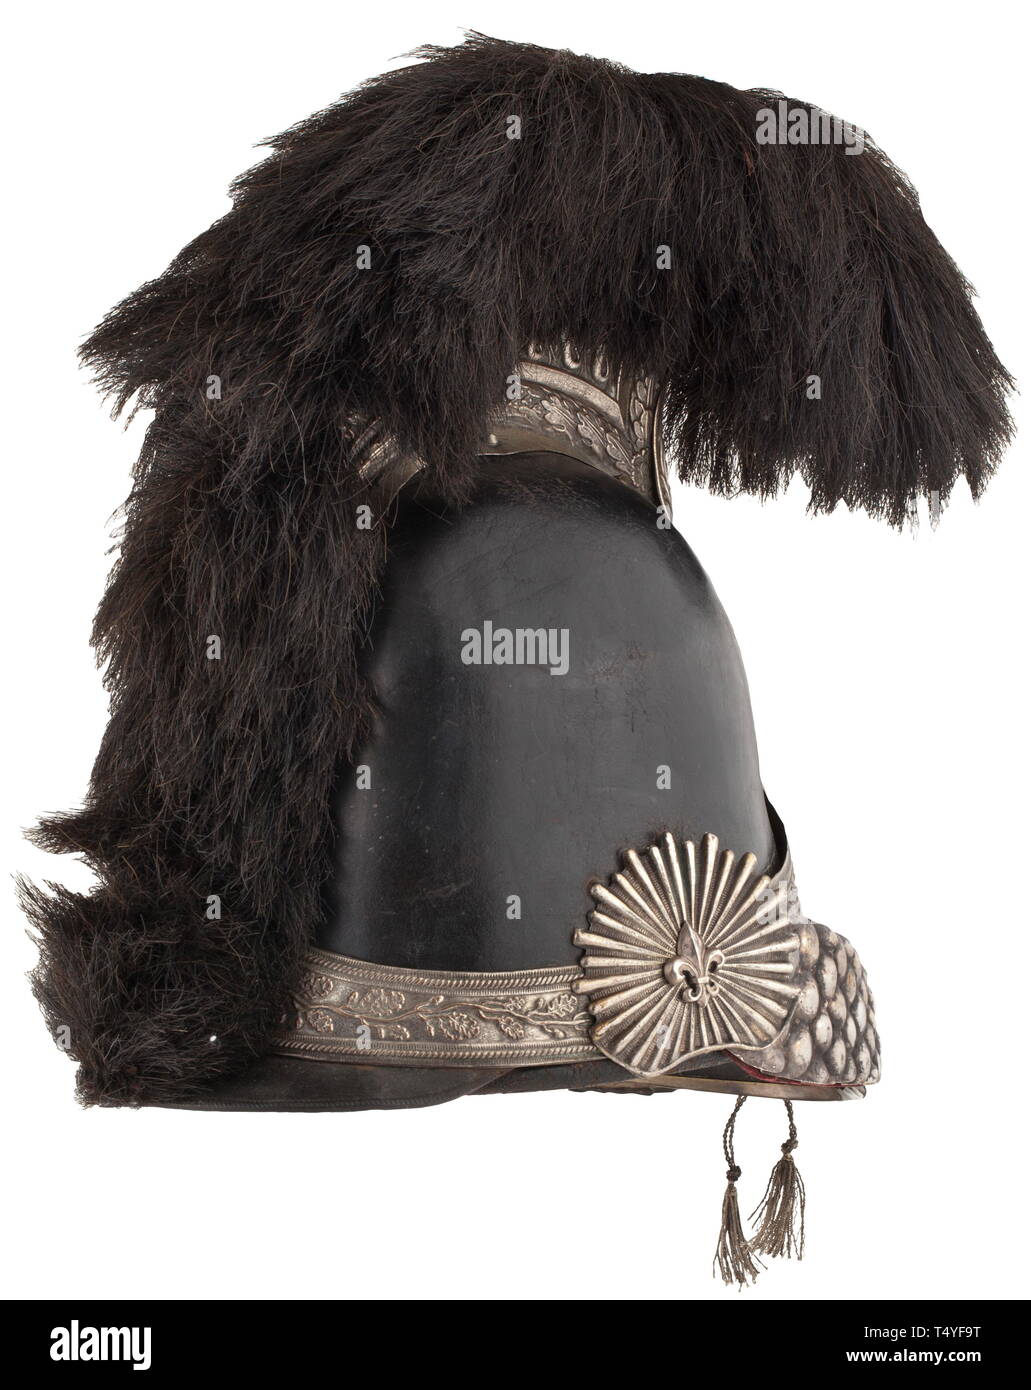 A helmet for horsemen of the National Guard, model of 1814 - 1820. Two-piece, black painted leather skull with silvered copper fittings, the screw-affixed emblem with a crowned lily appliqué. The high comb is likewise silvered and in fine relief with a black fur crest. Chinscales with velvet underlay and lacing, the rosettes likewise with a lily symbol. Silver-trimmed leather peak, the leather liner with slight damage. With a non-original white hair brush. Signs of usage and age. Height ca. 34 cm. Cf. Tavard, Casques et Coiffures Militaires Franc, Additional-Rights-Clearance-Info-Not-Available Stock Photo